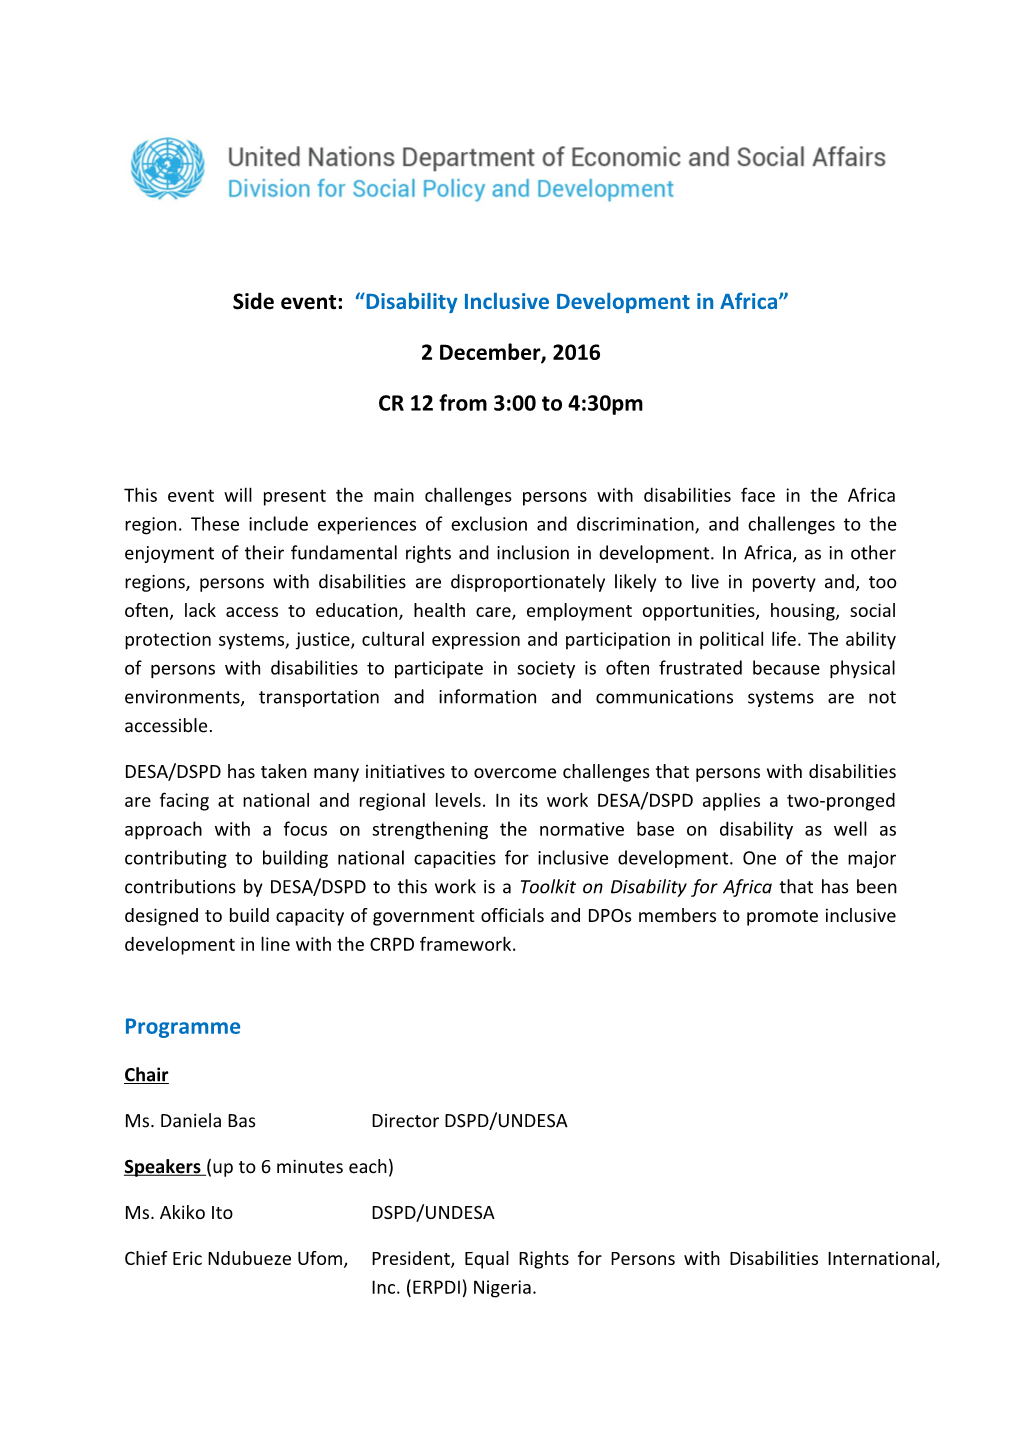 Side Event: Disability Inclusive Development in Africa